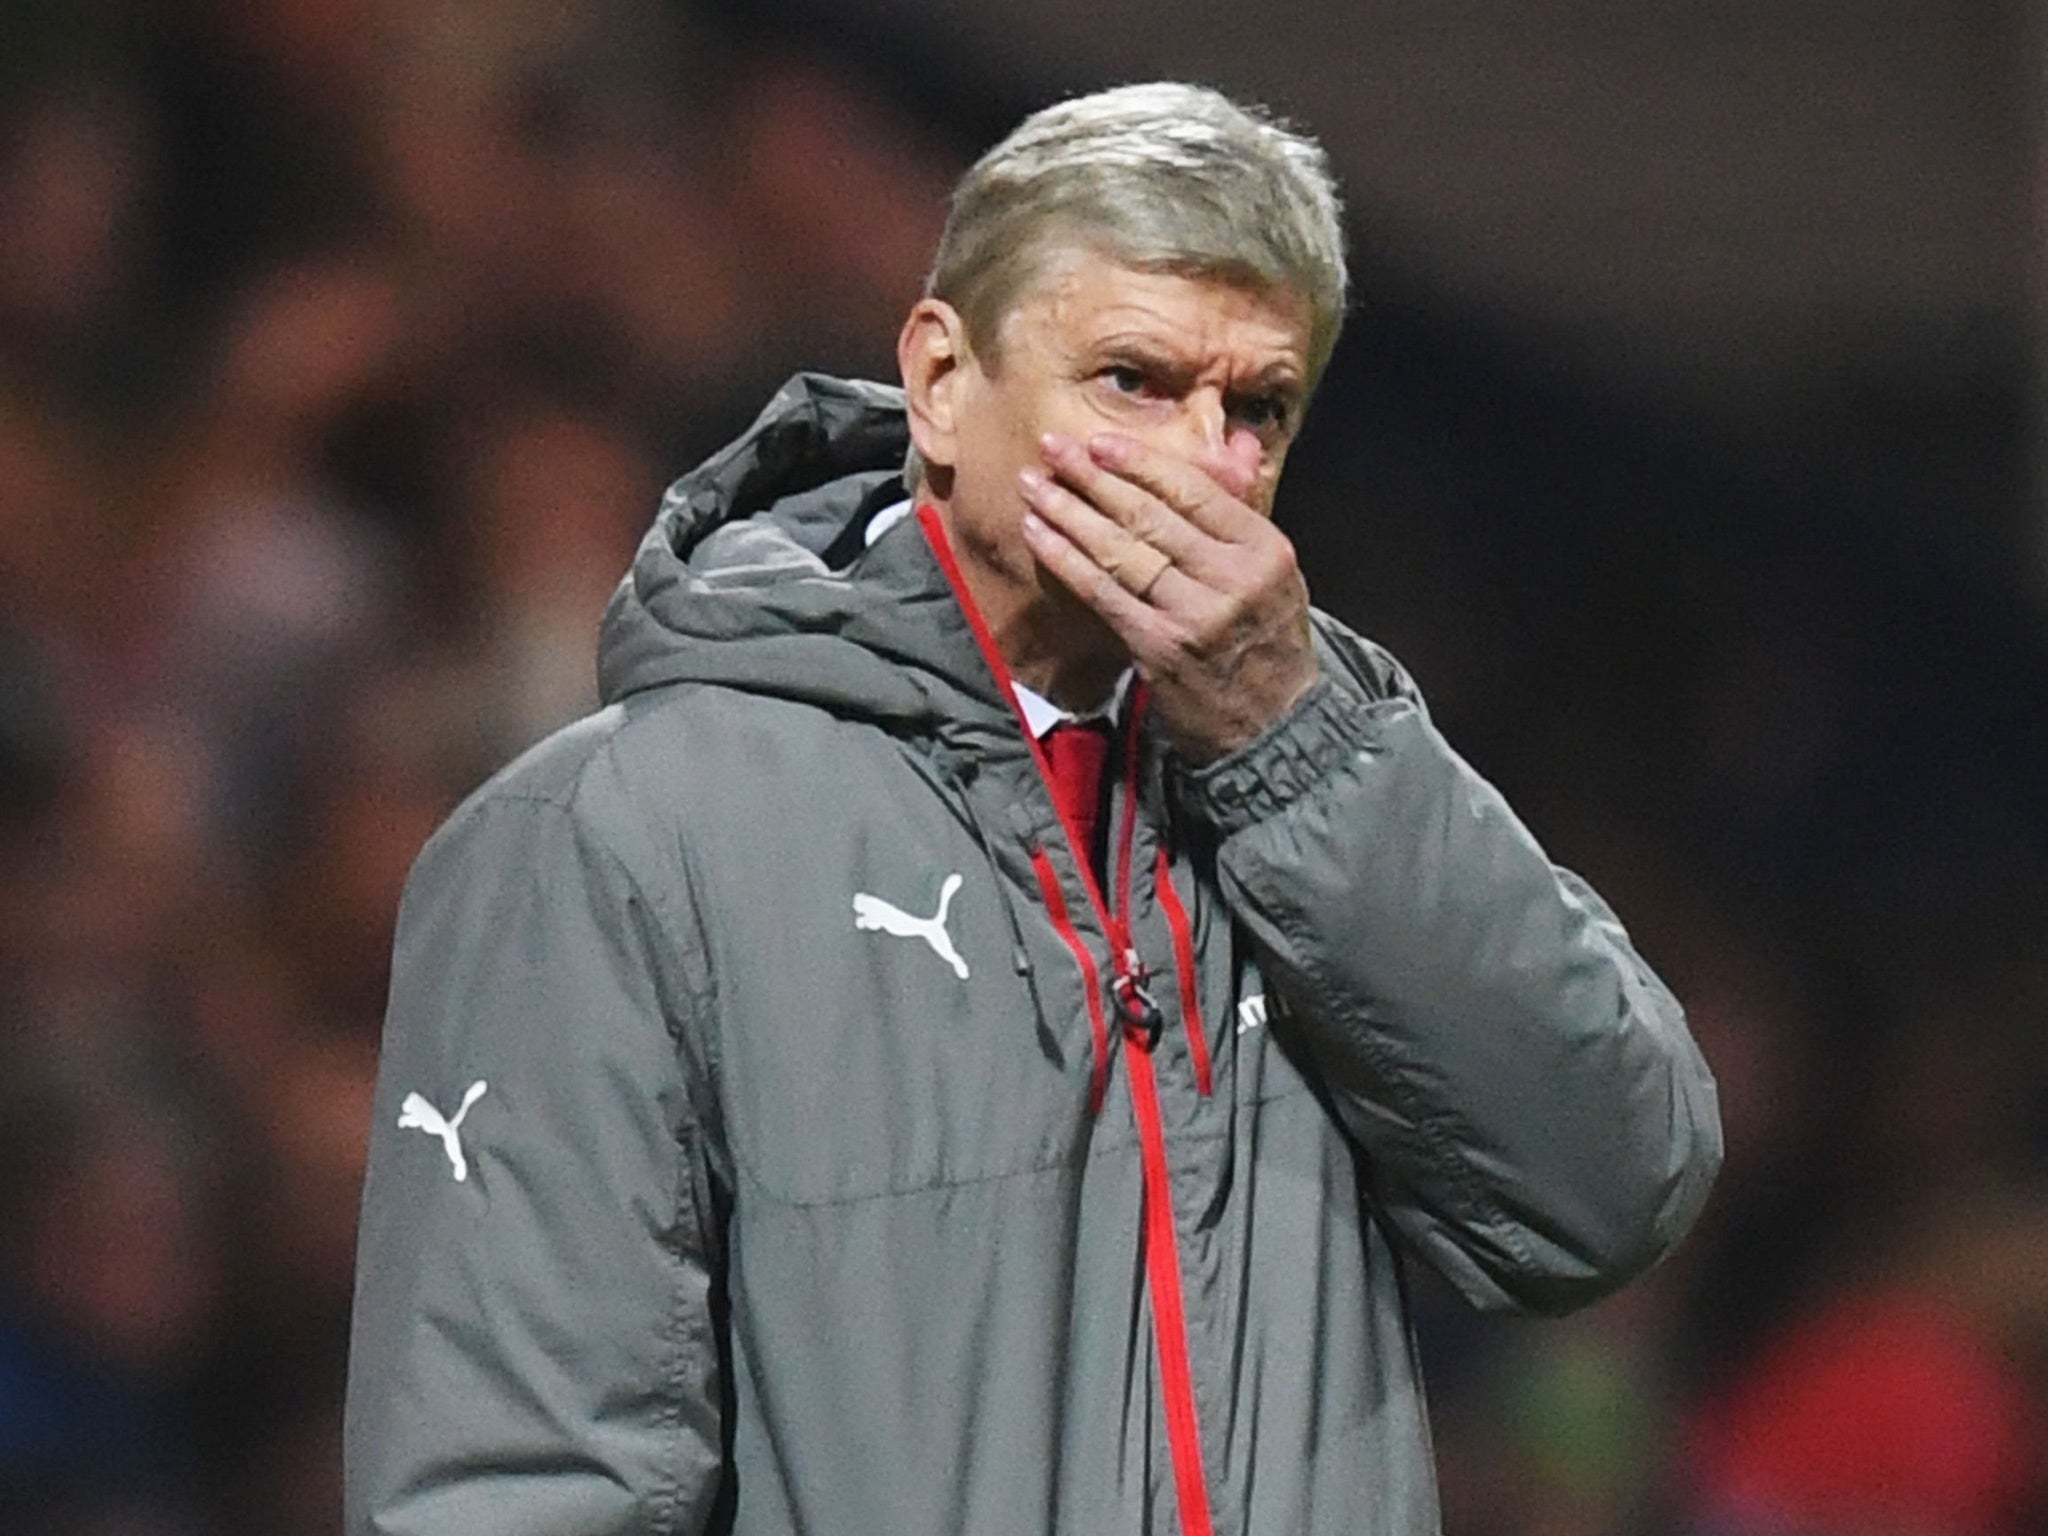 Wenger is yet to go out at the FA Cup's third round stage as Arsenal manager